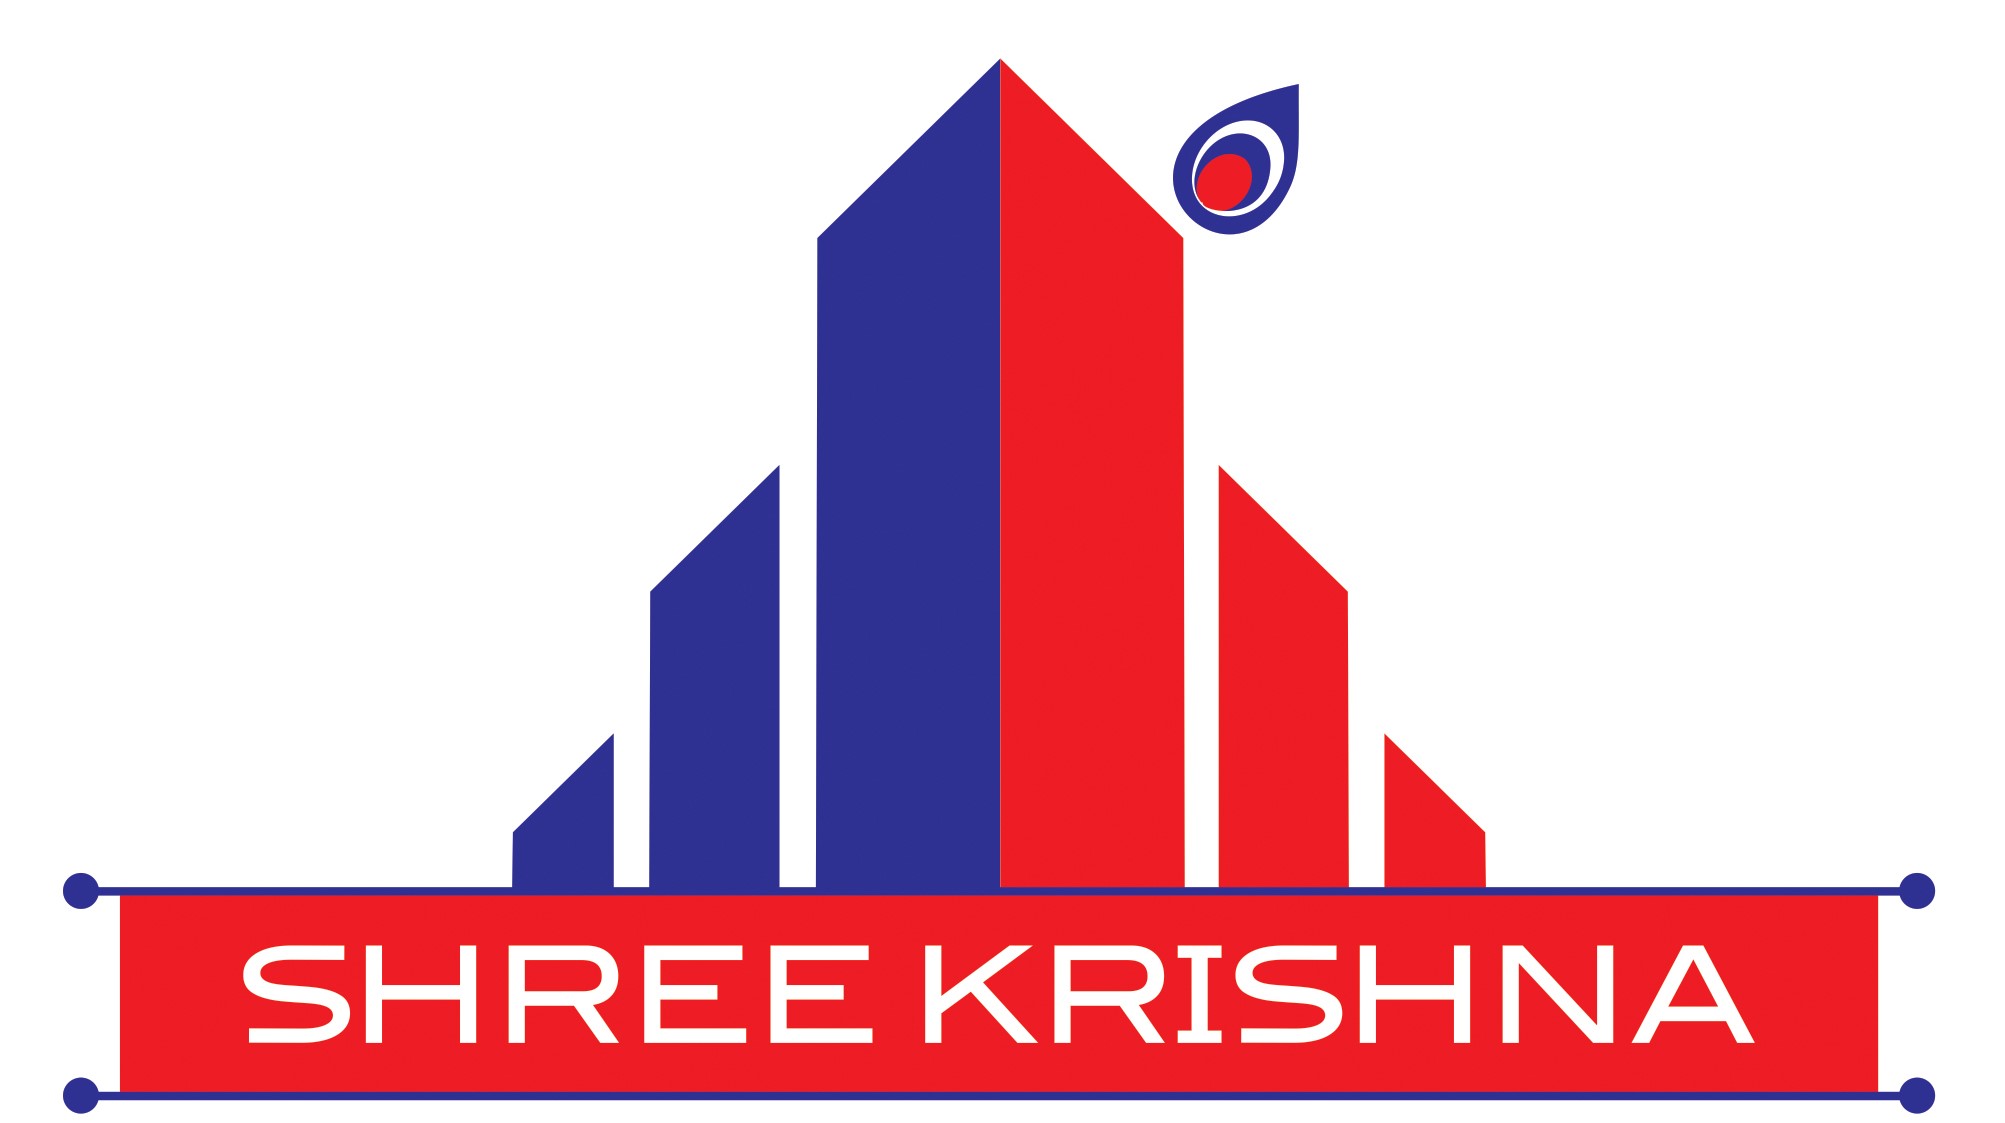 Krishna Logo Photos, Images and Pictures